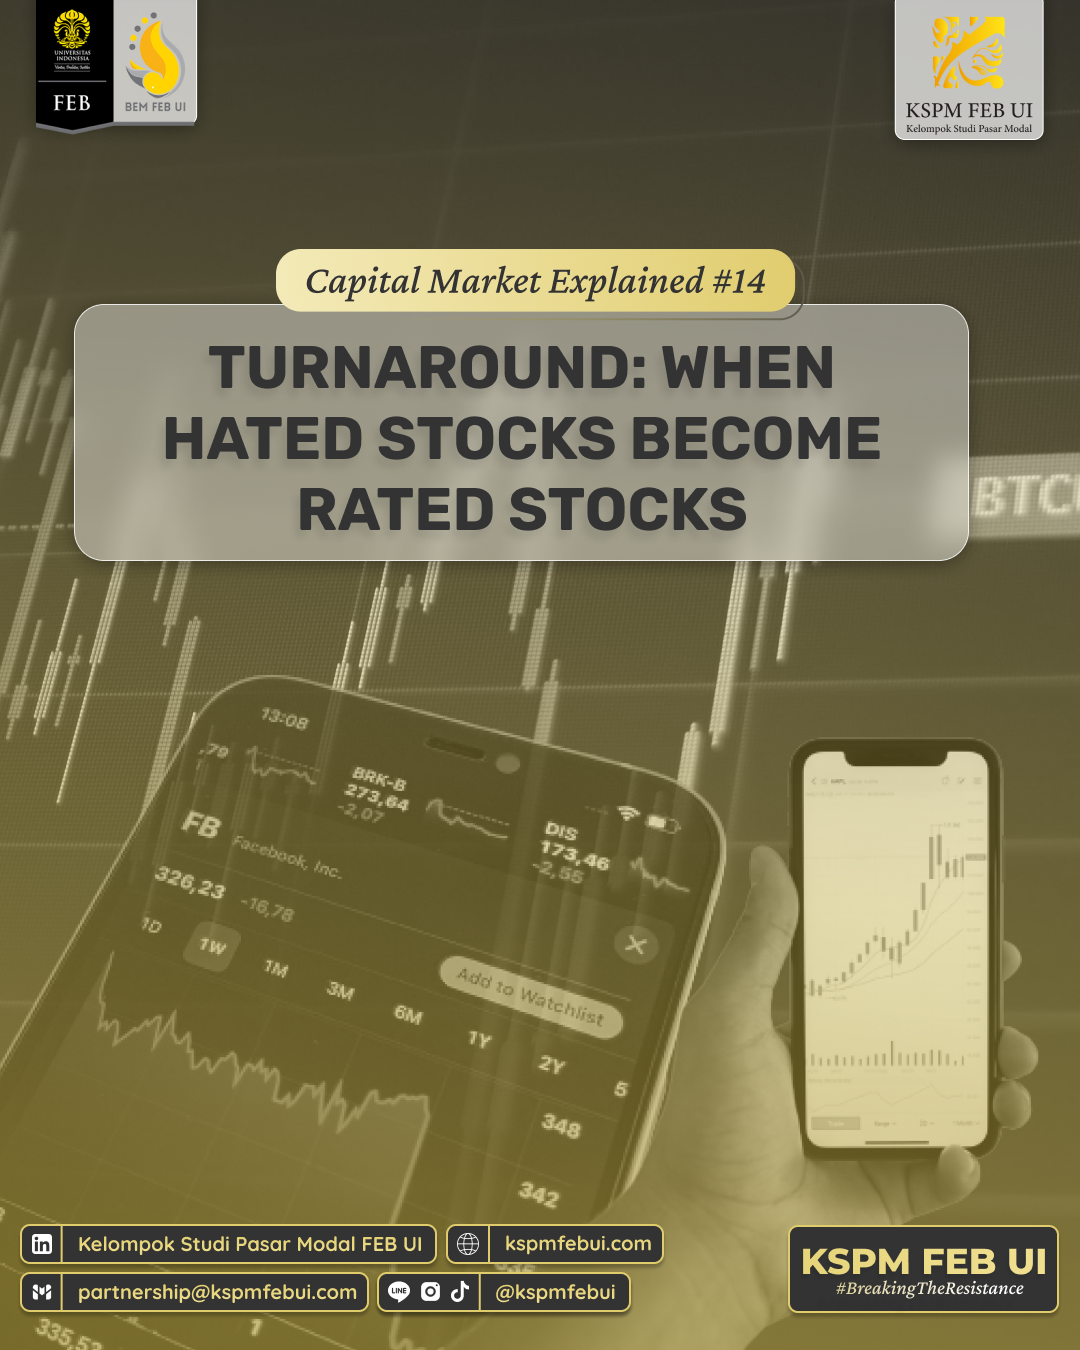 CME #14 : Turnaround: When Hated Stocks Become Rated Stocks